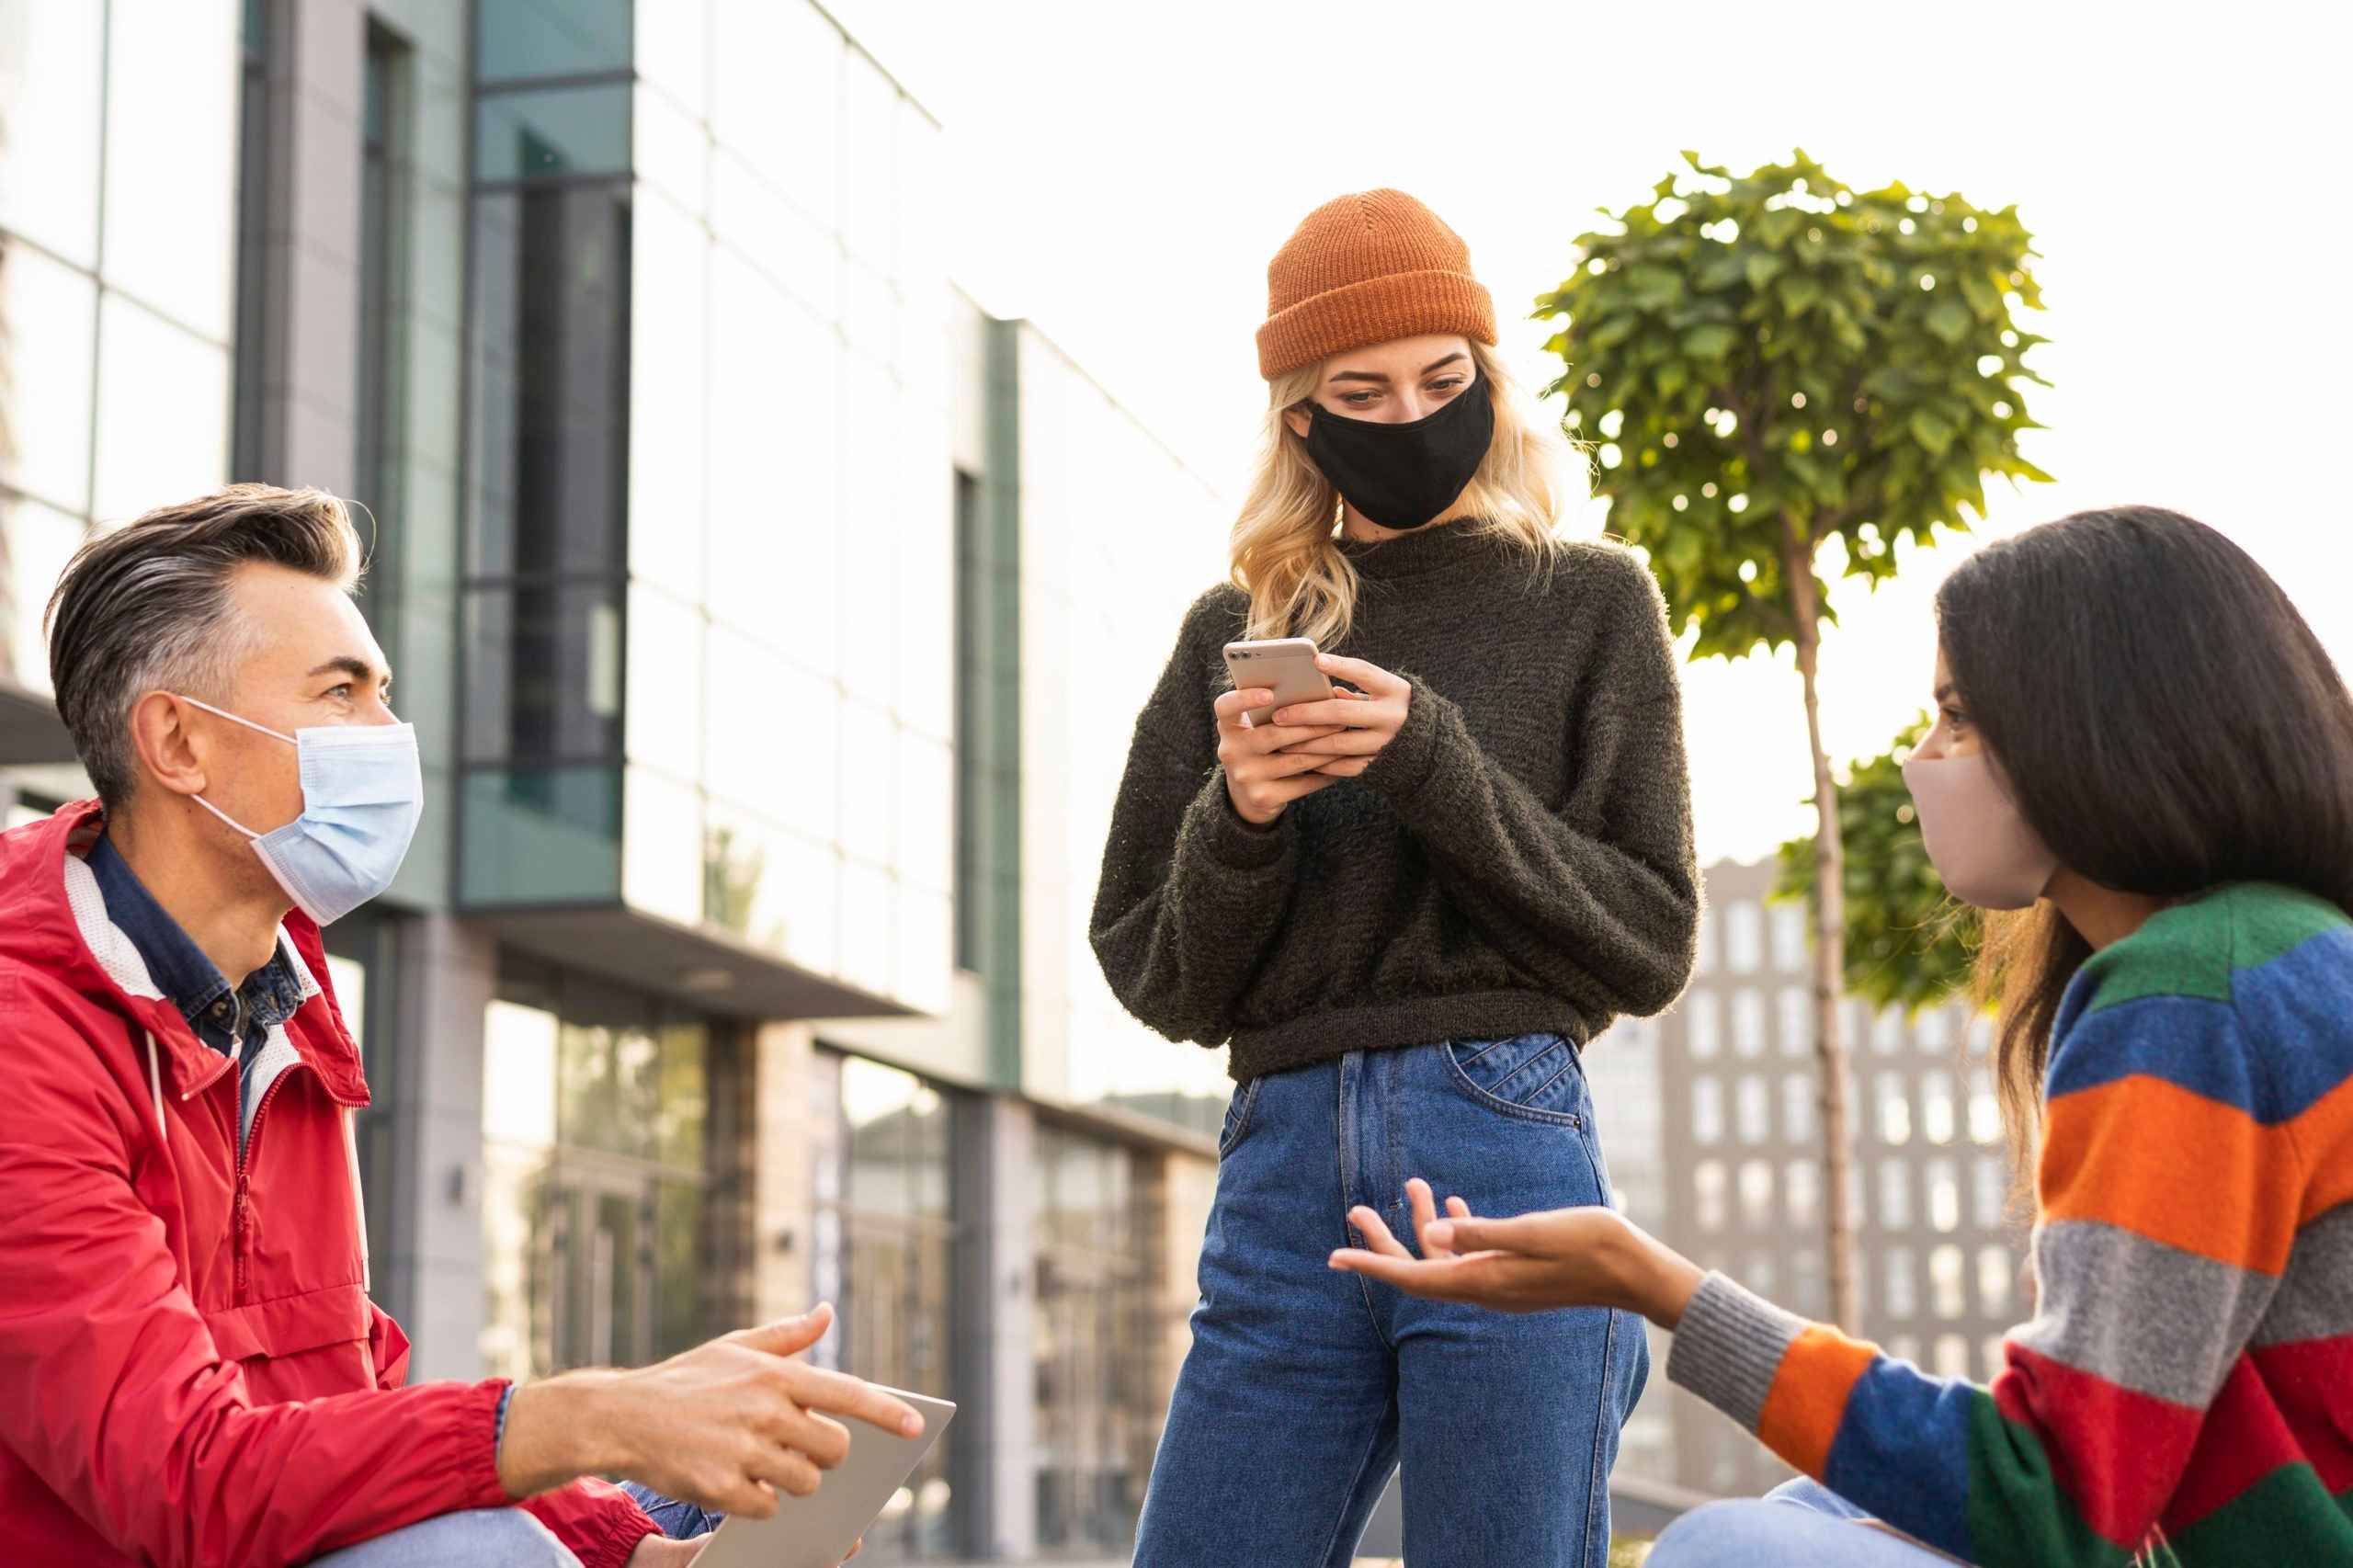 Teenagers discussing while wearing mask